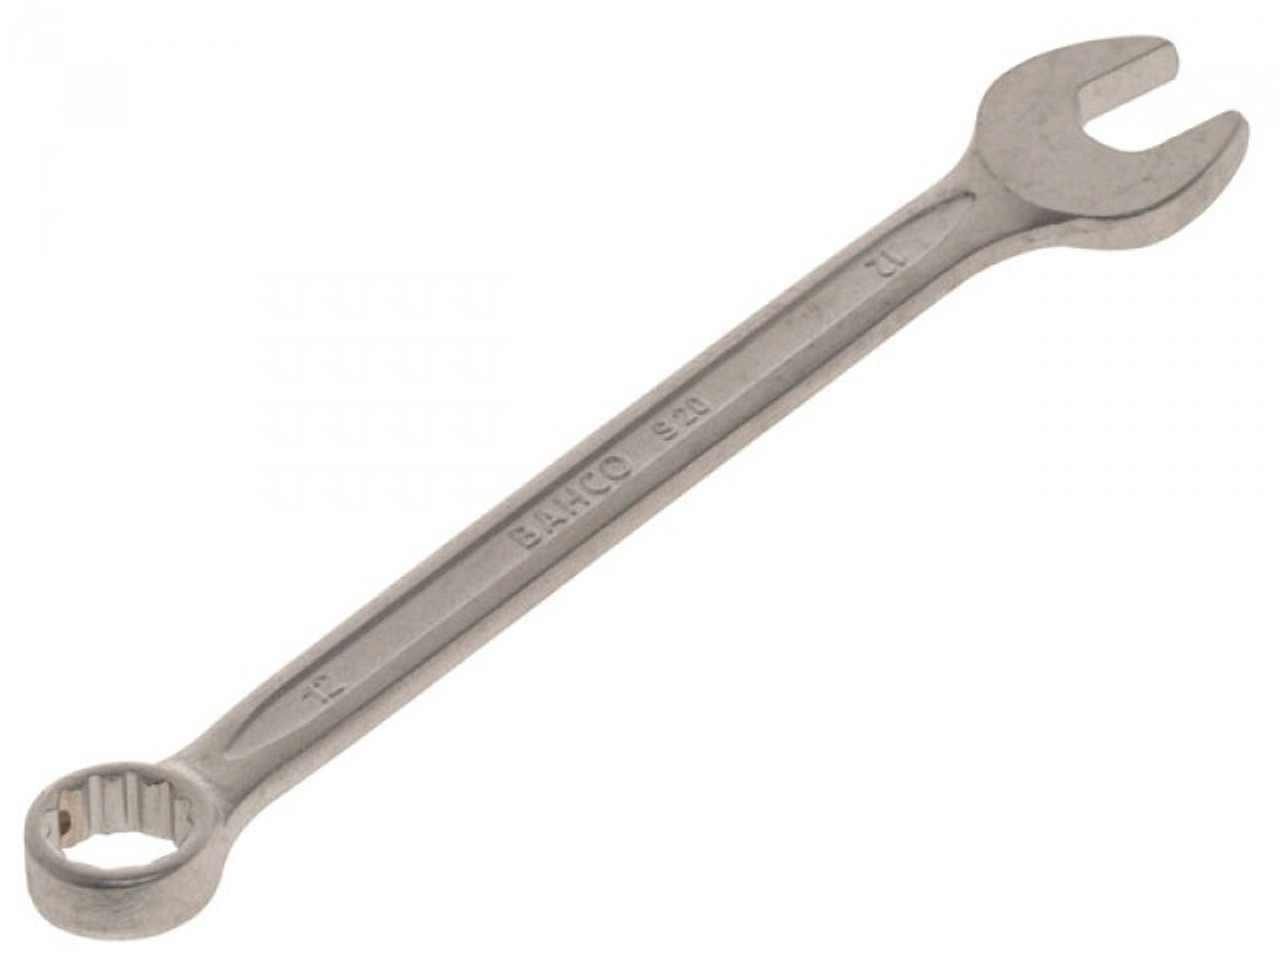 IMPA 616154 WRENCH OPEN & 12-POINT BOX BAHCO PU32 32MM